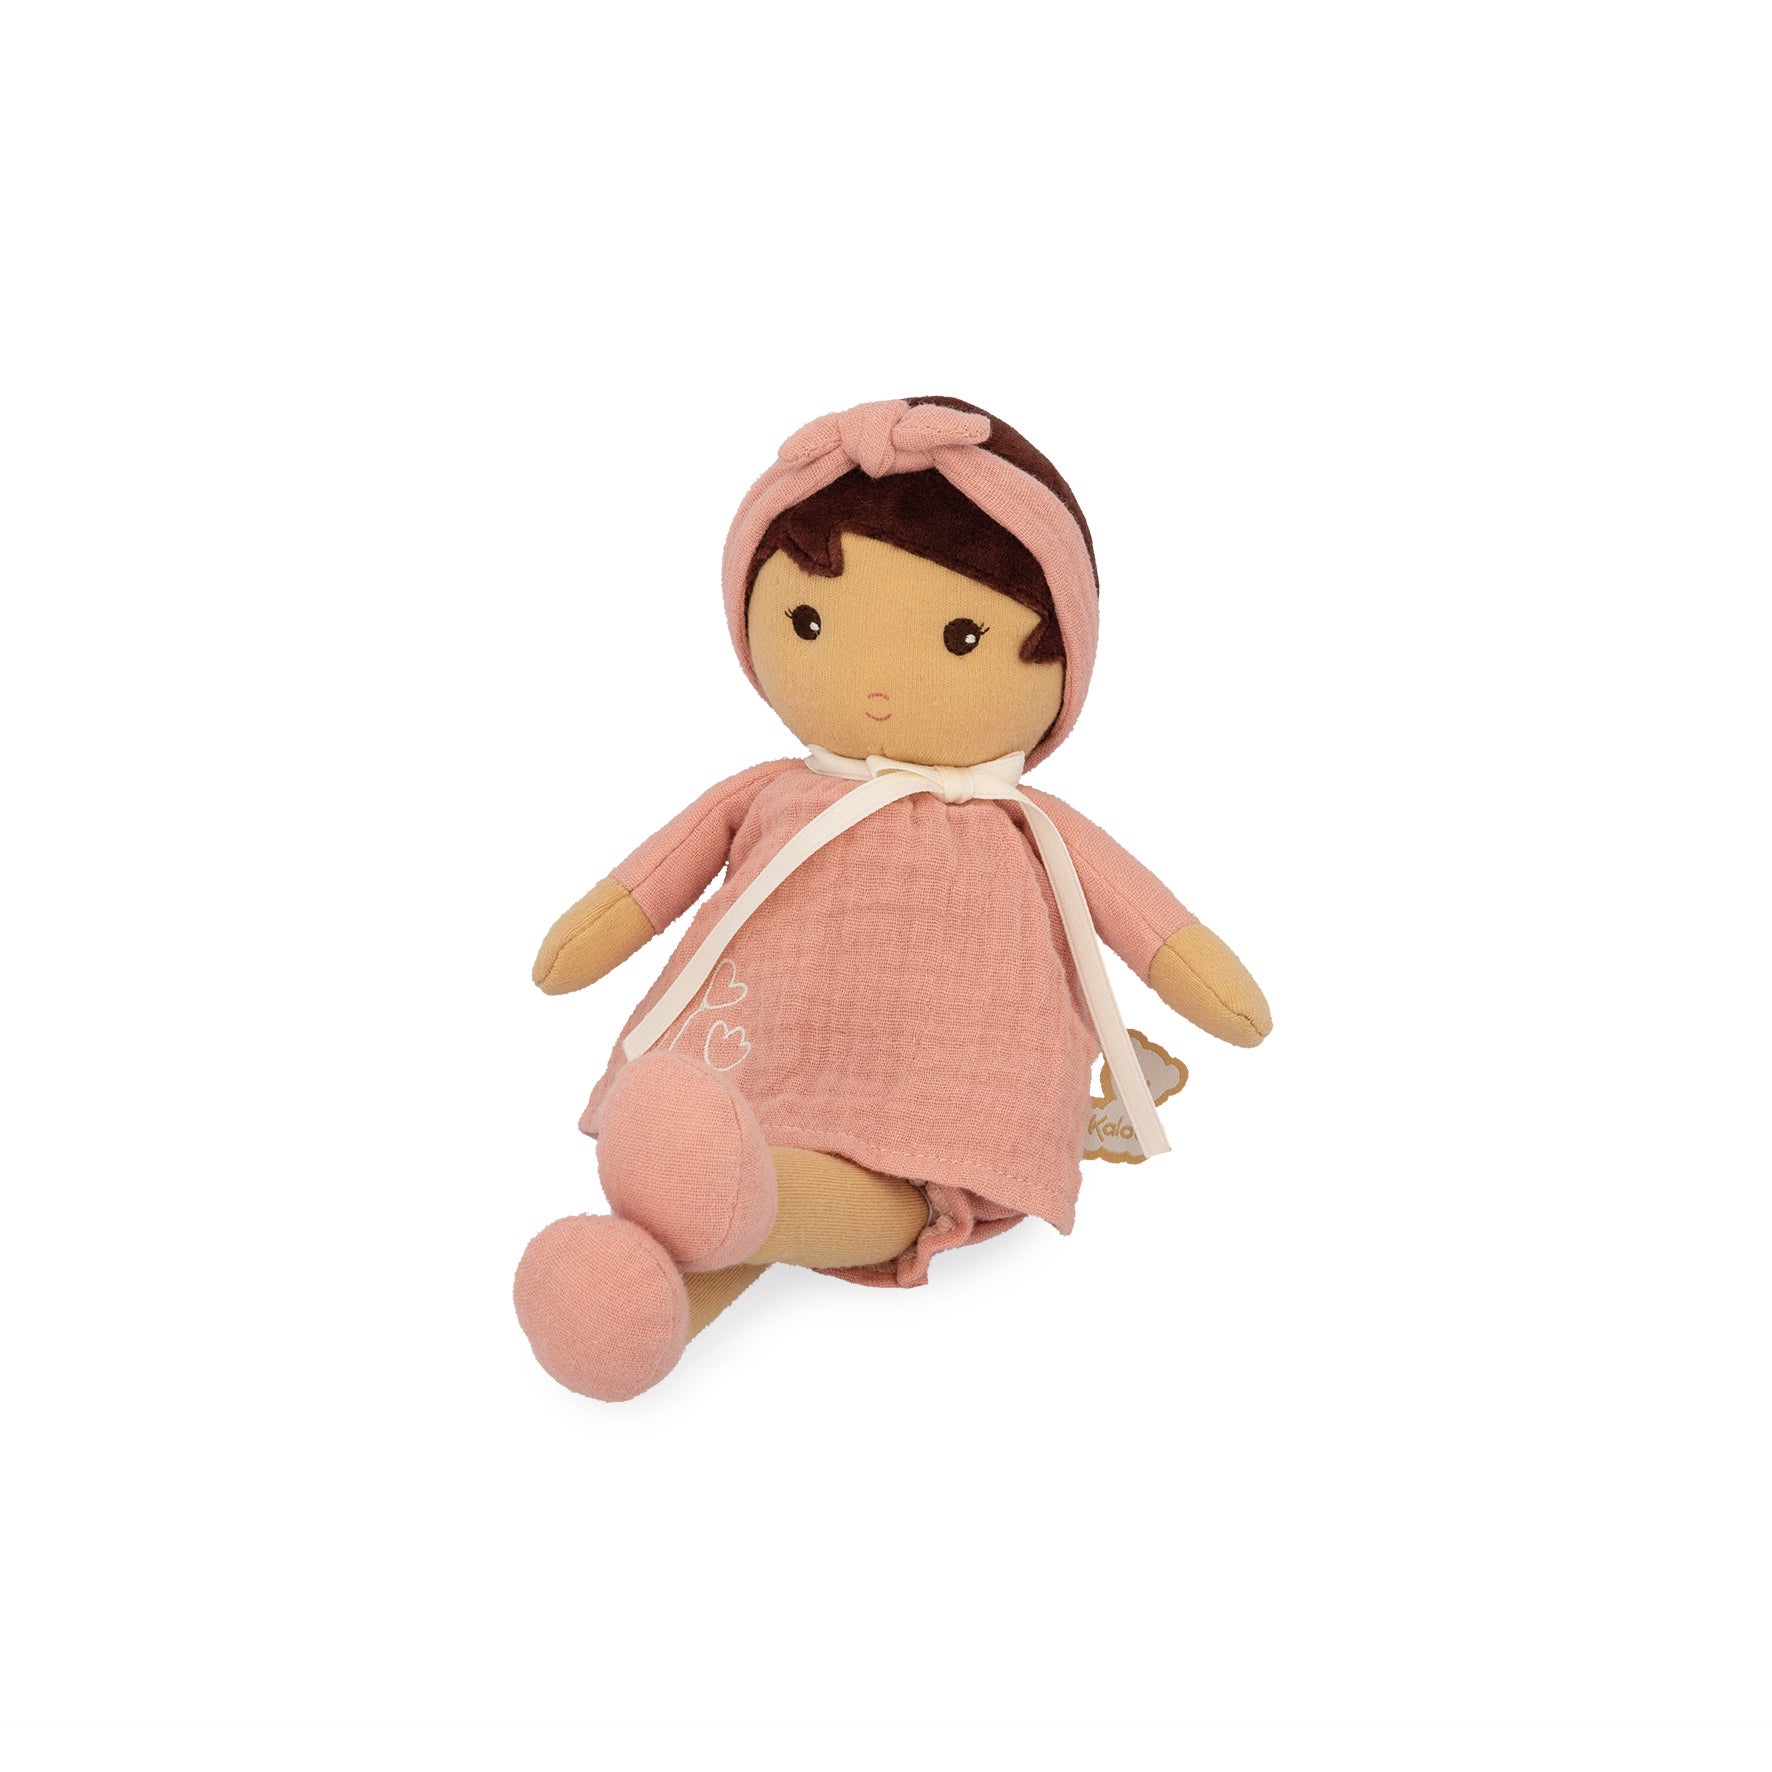 Kaloo My First Doll Amandine 25cm (9.8 IN)